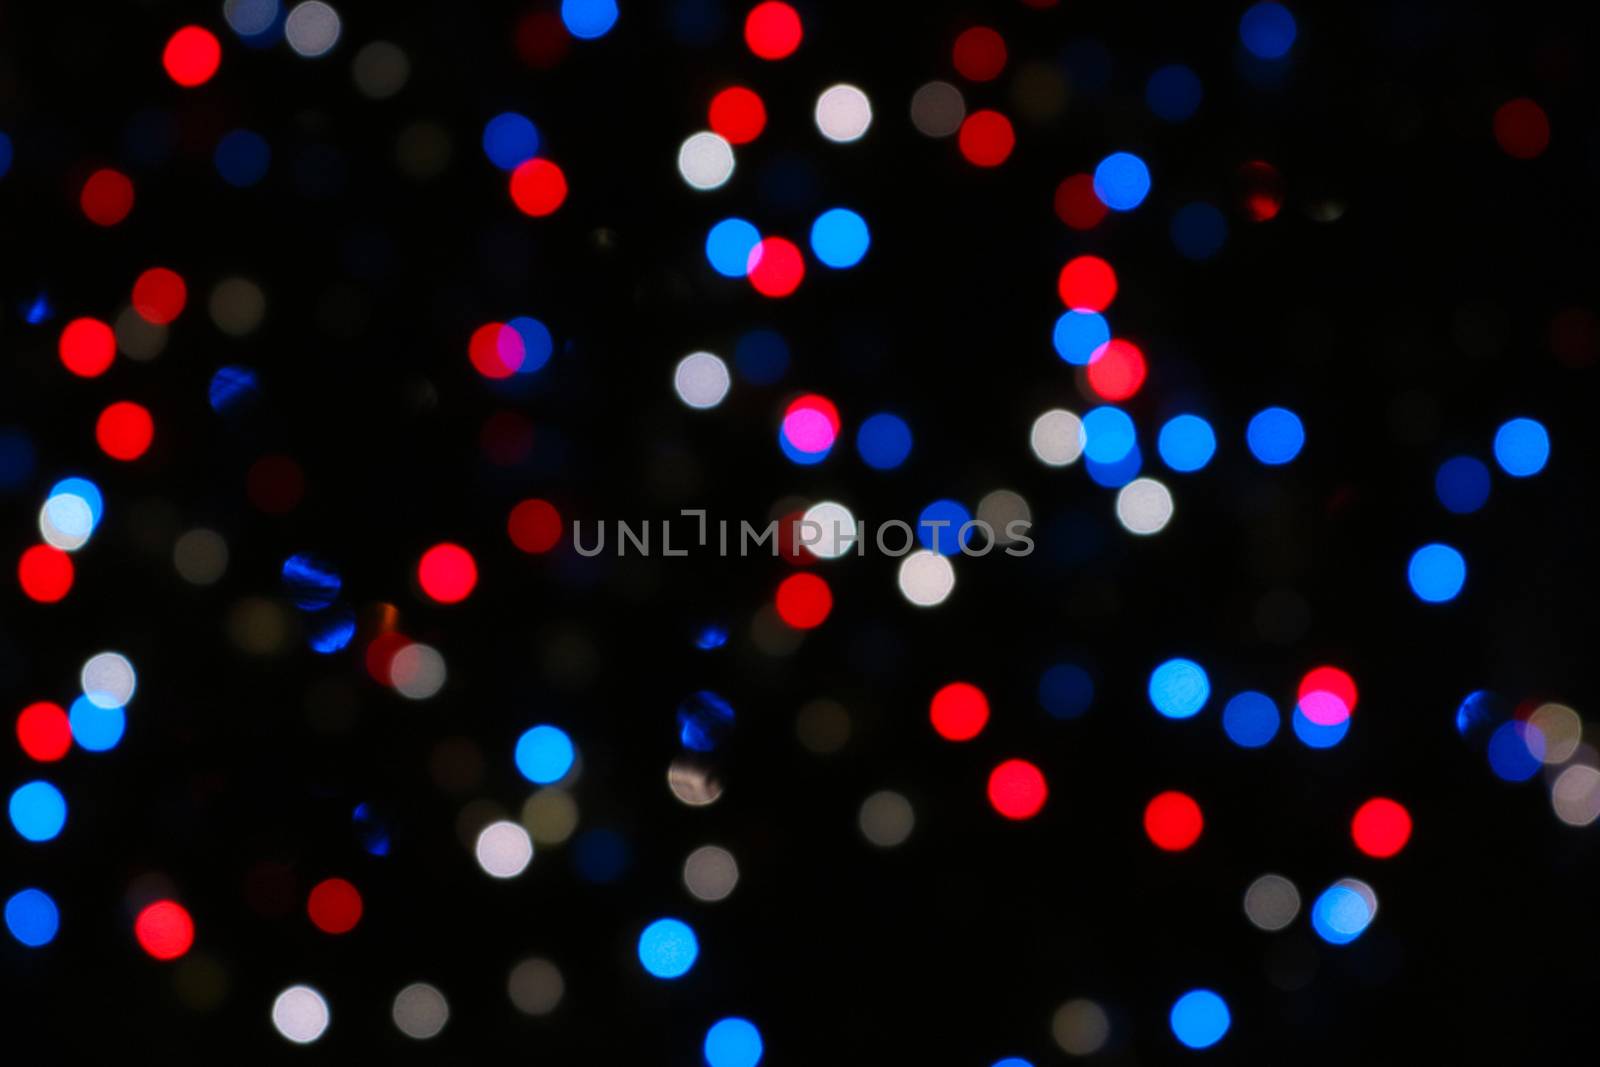 image of bright colorful bokeh blurry background